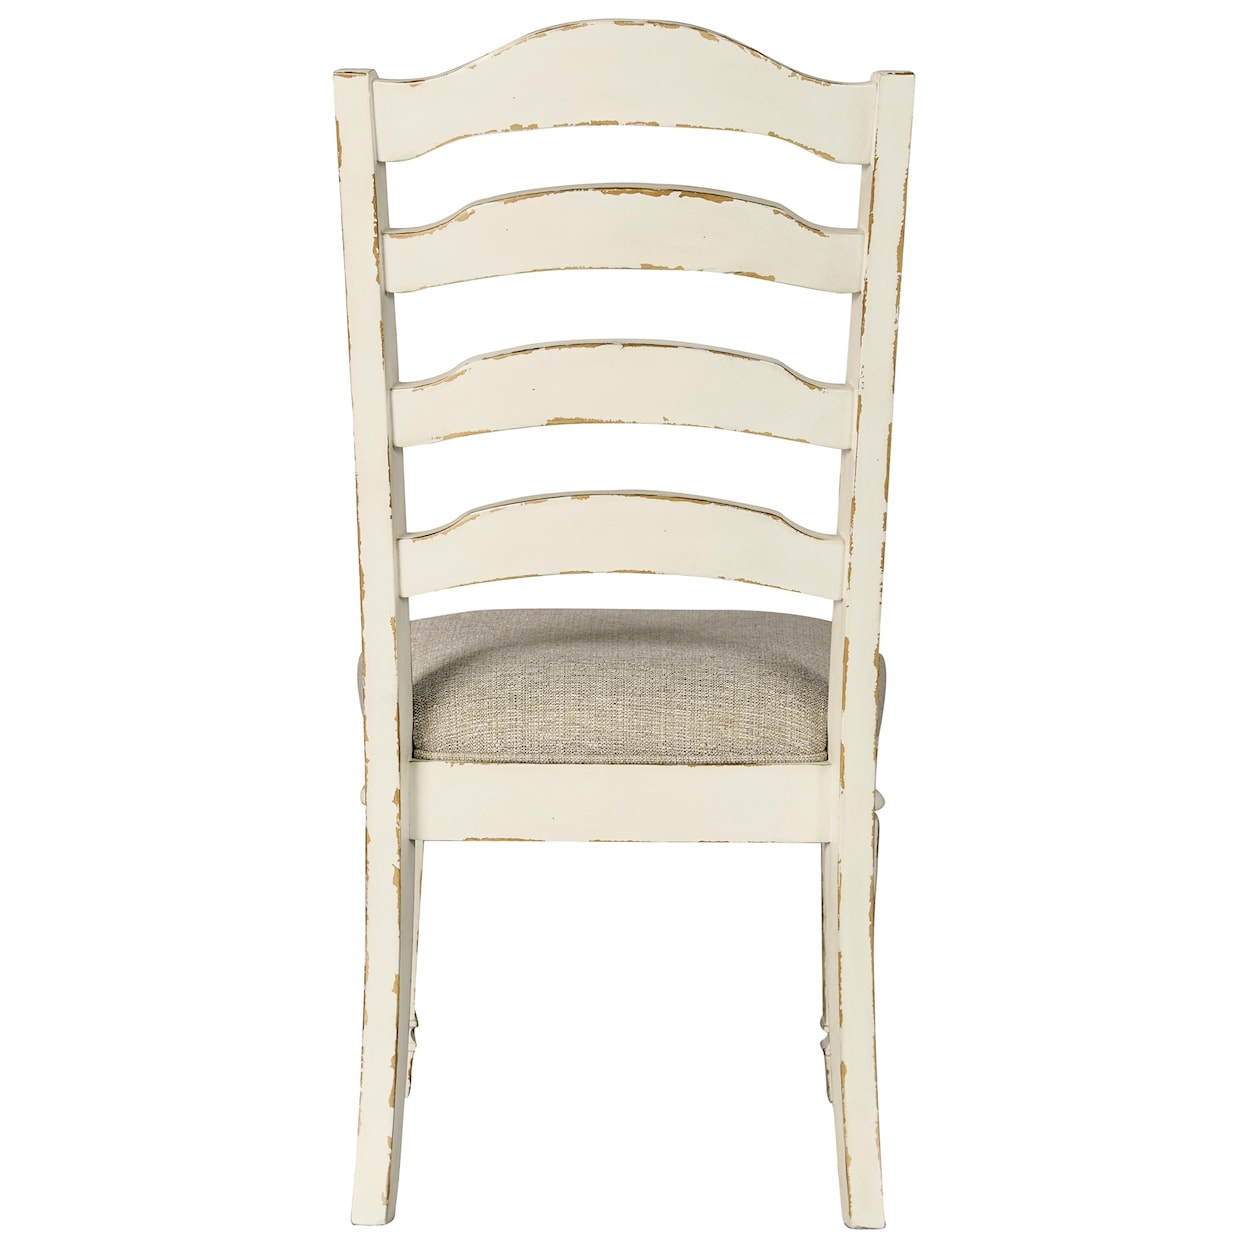 Signature Design by Ashley Realyn Dining Side Chair